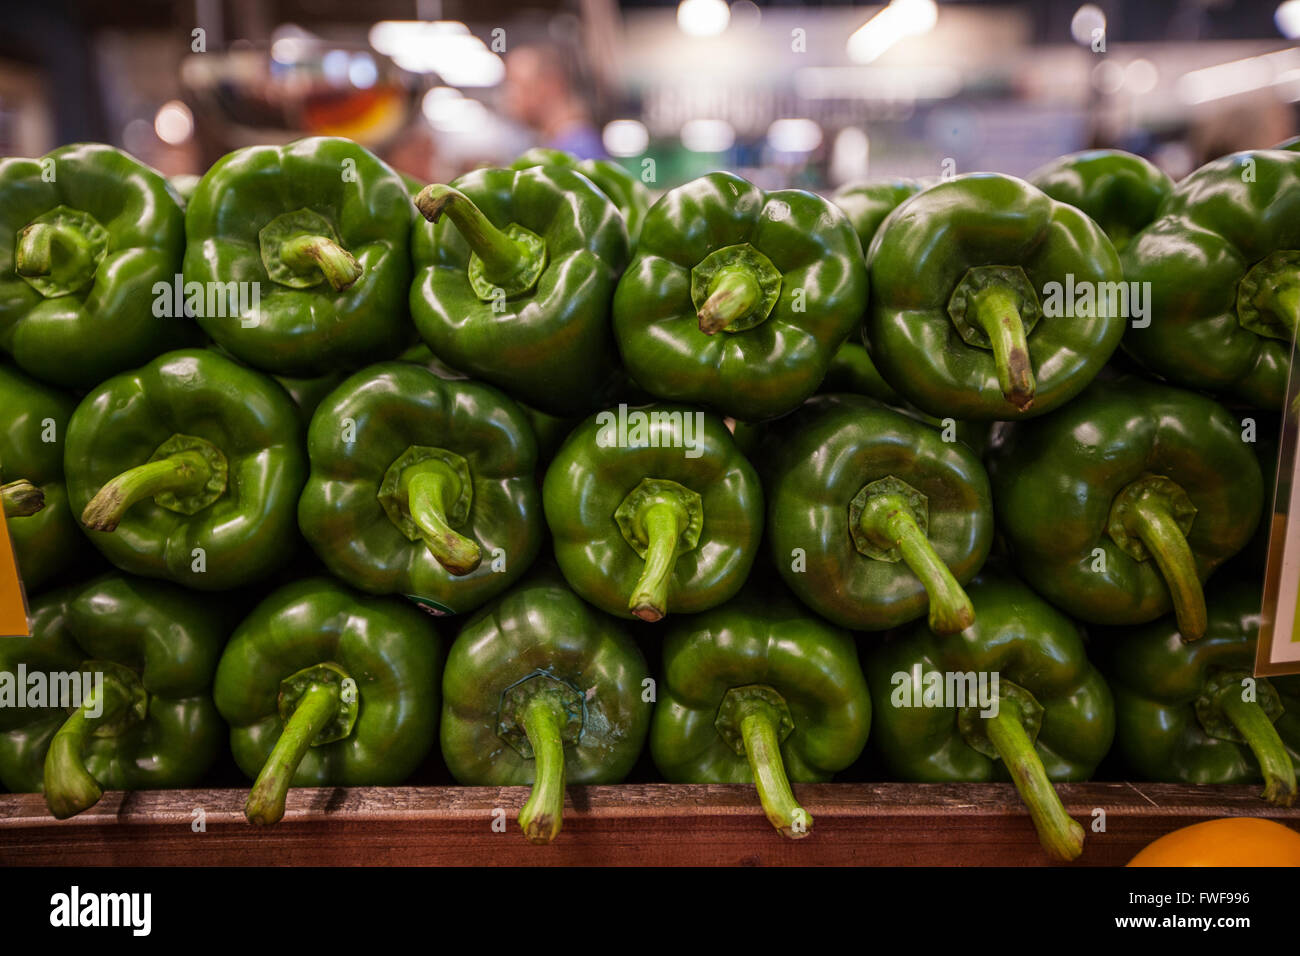 a tightly packed stack of green bell peppers on display in the produce section of a grocery store Stock Photo